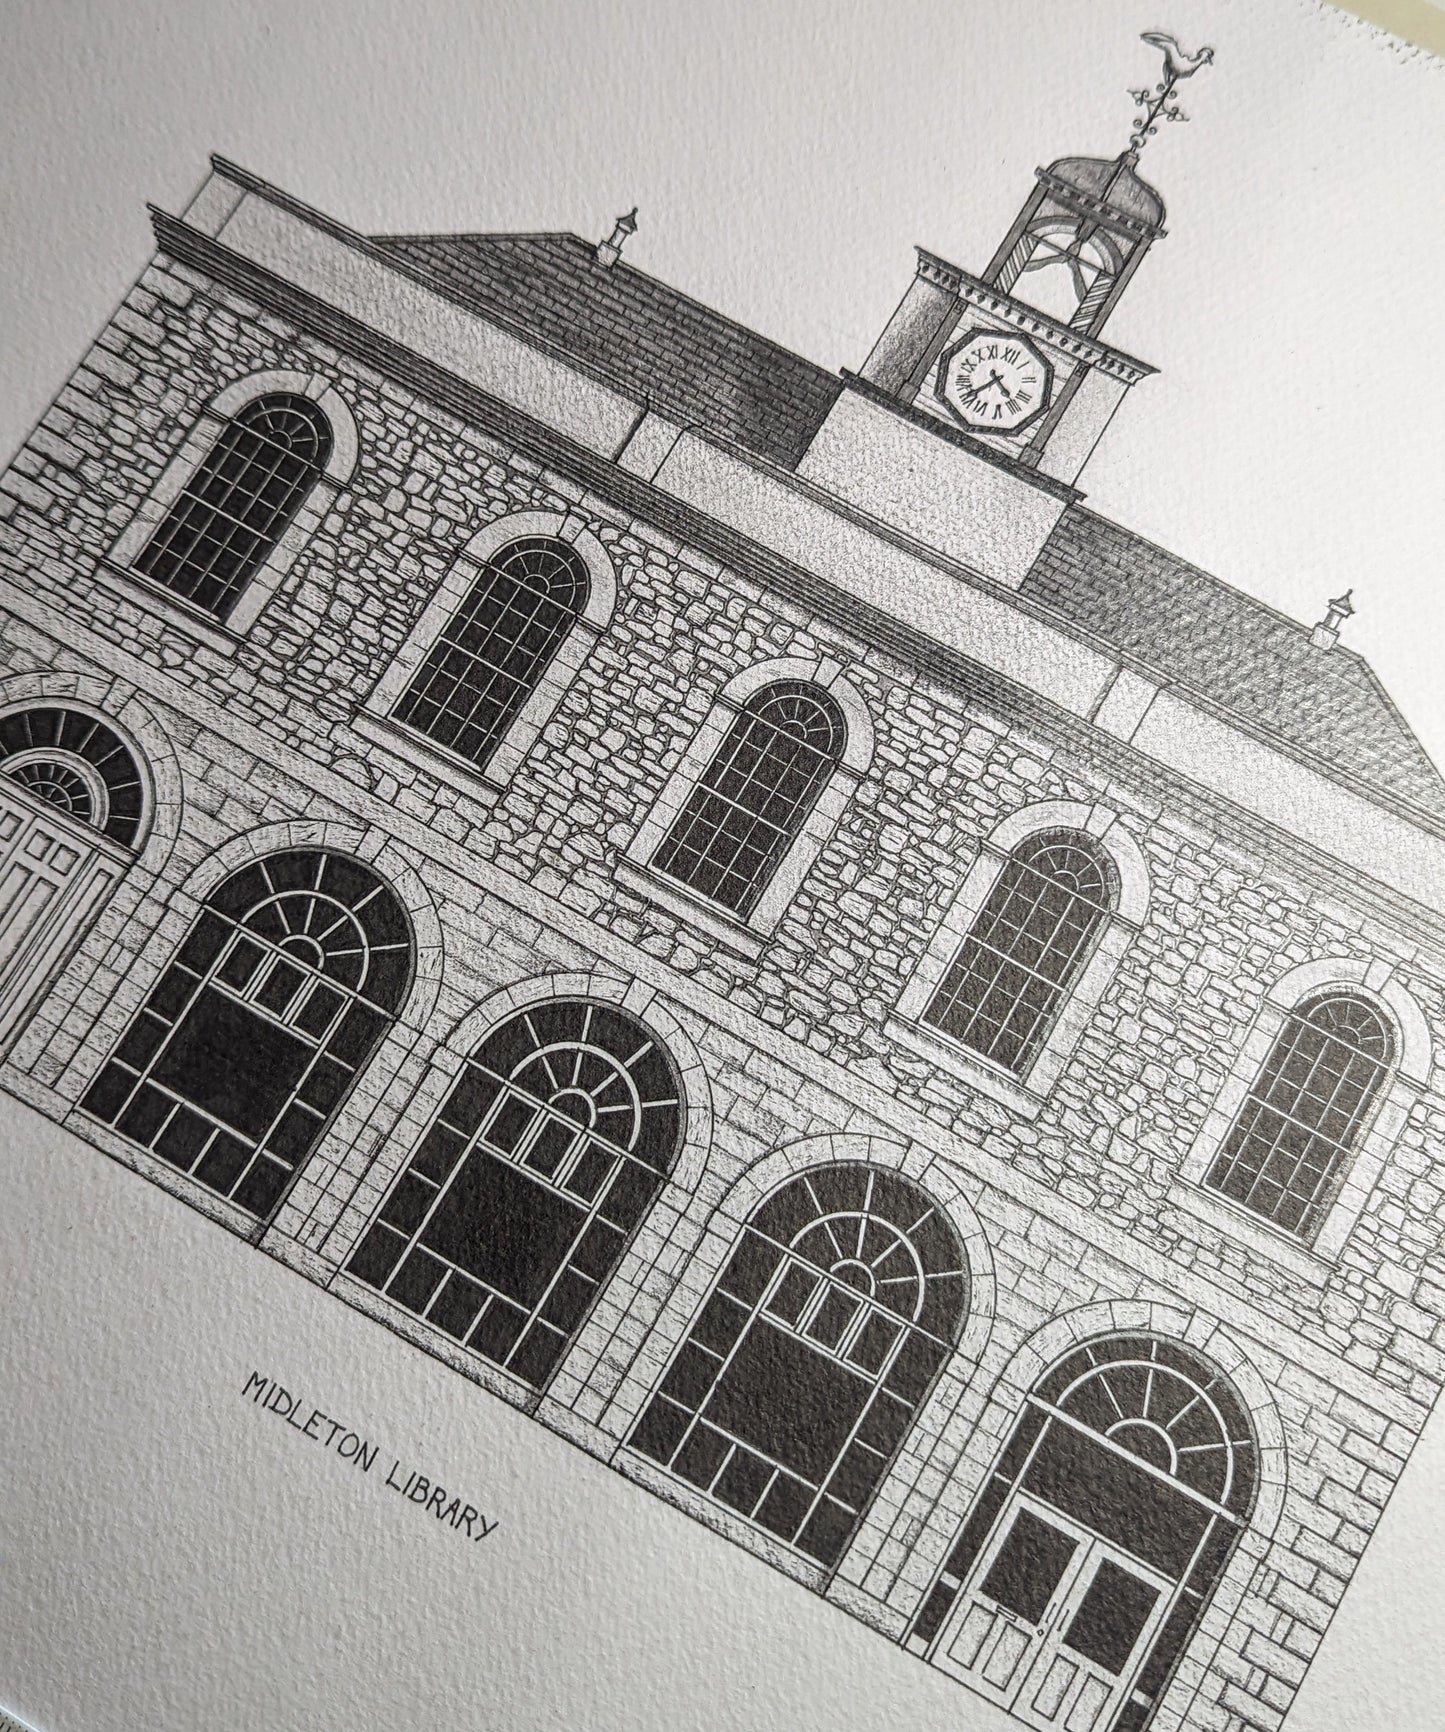 Midleton Library - High Quality Architecture Print